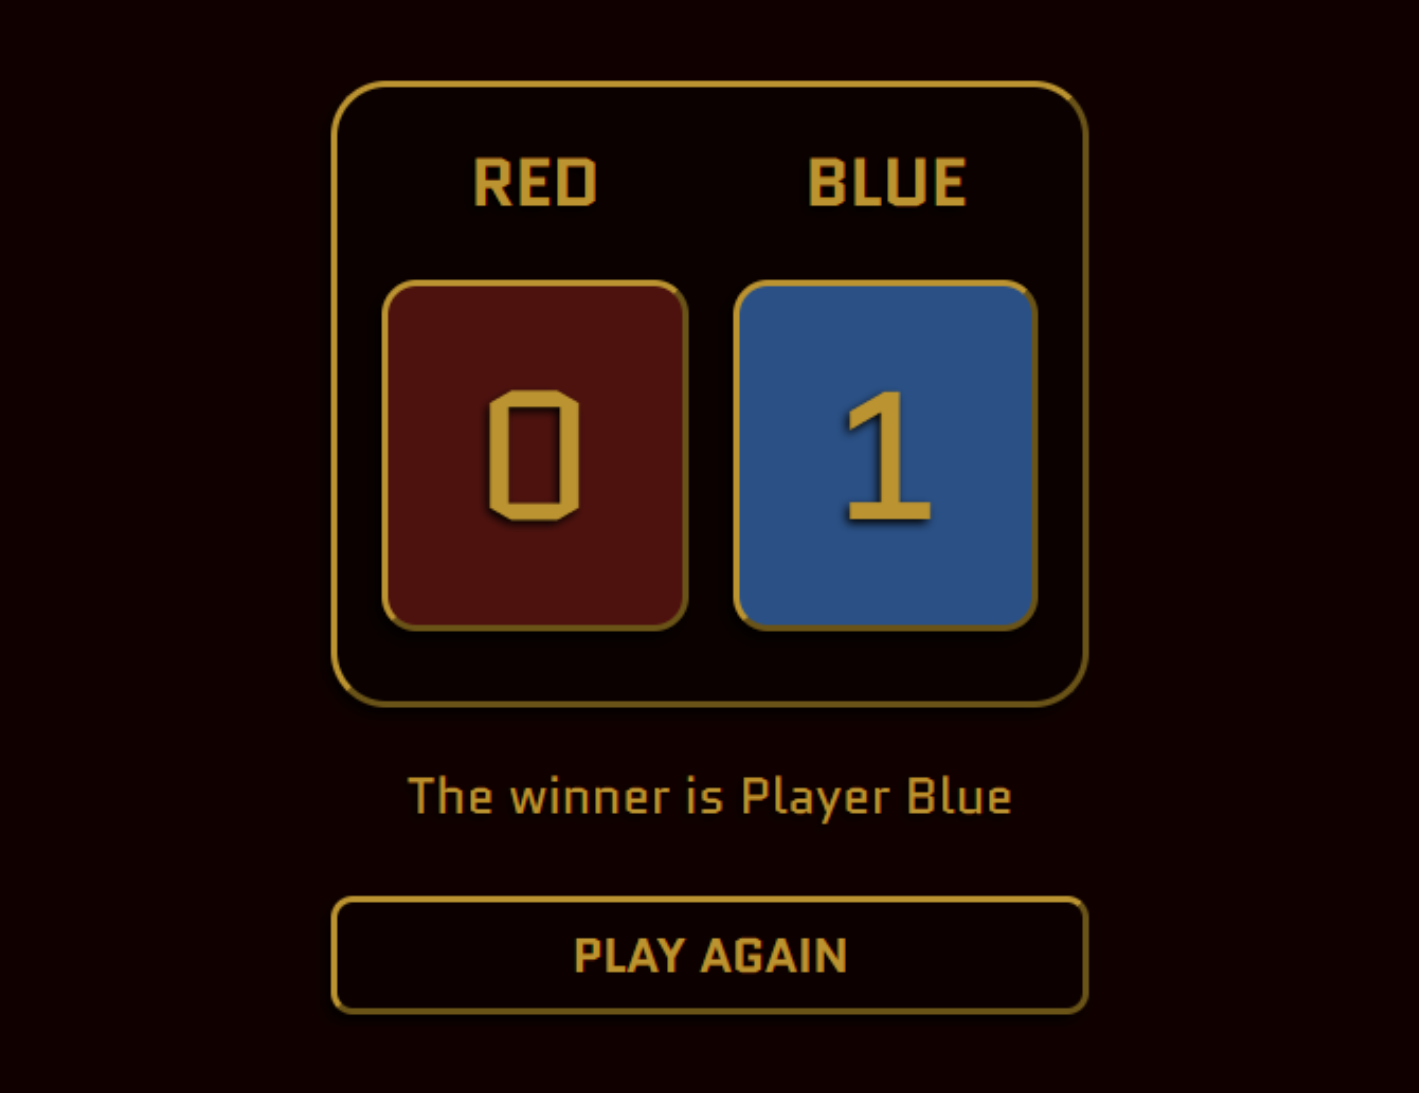 Scoreboard for blue and red players